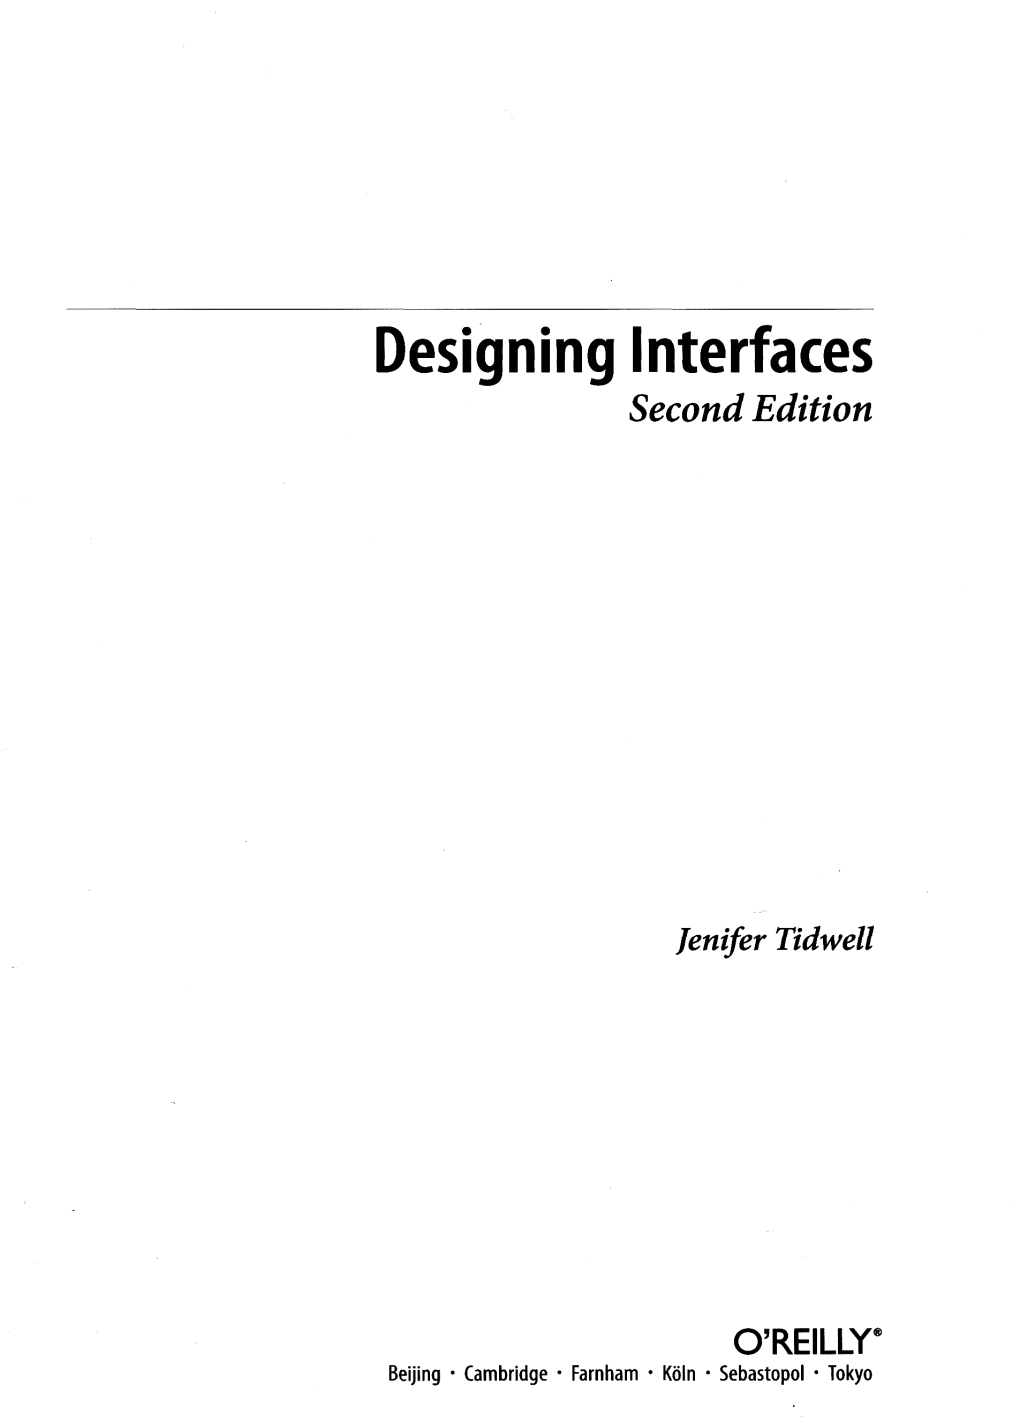 Designing Interfaces Second Edition